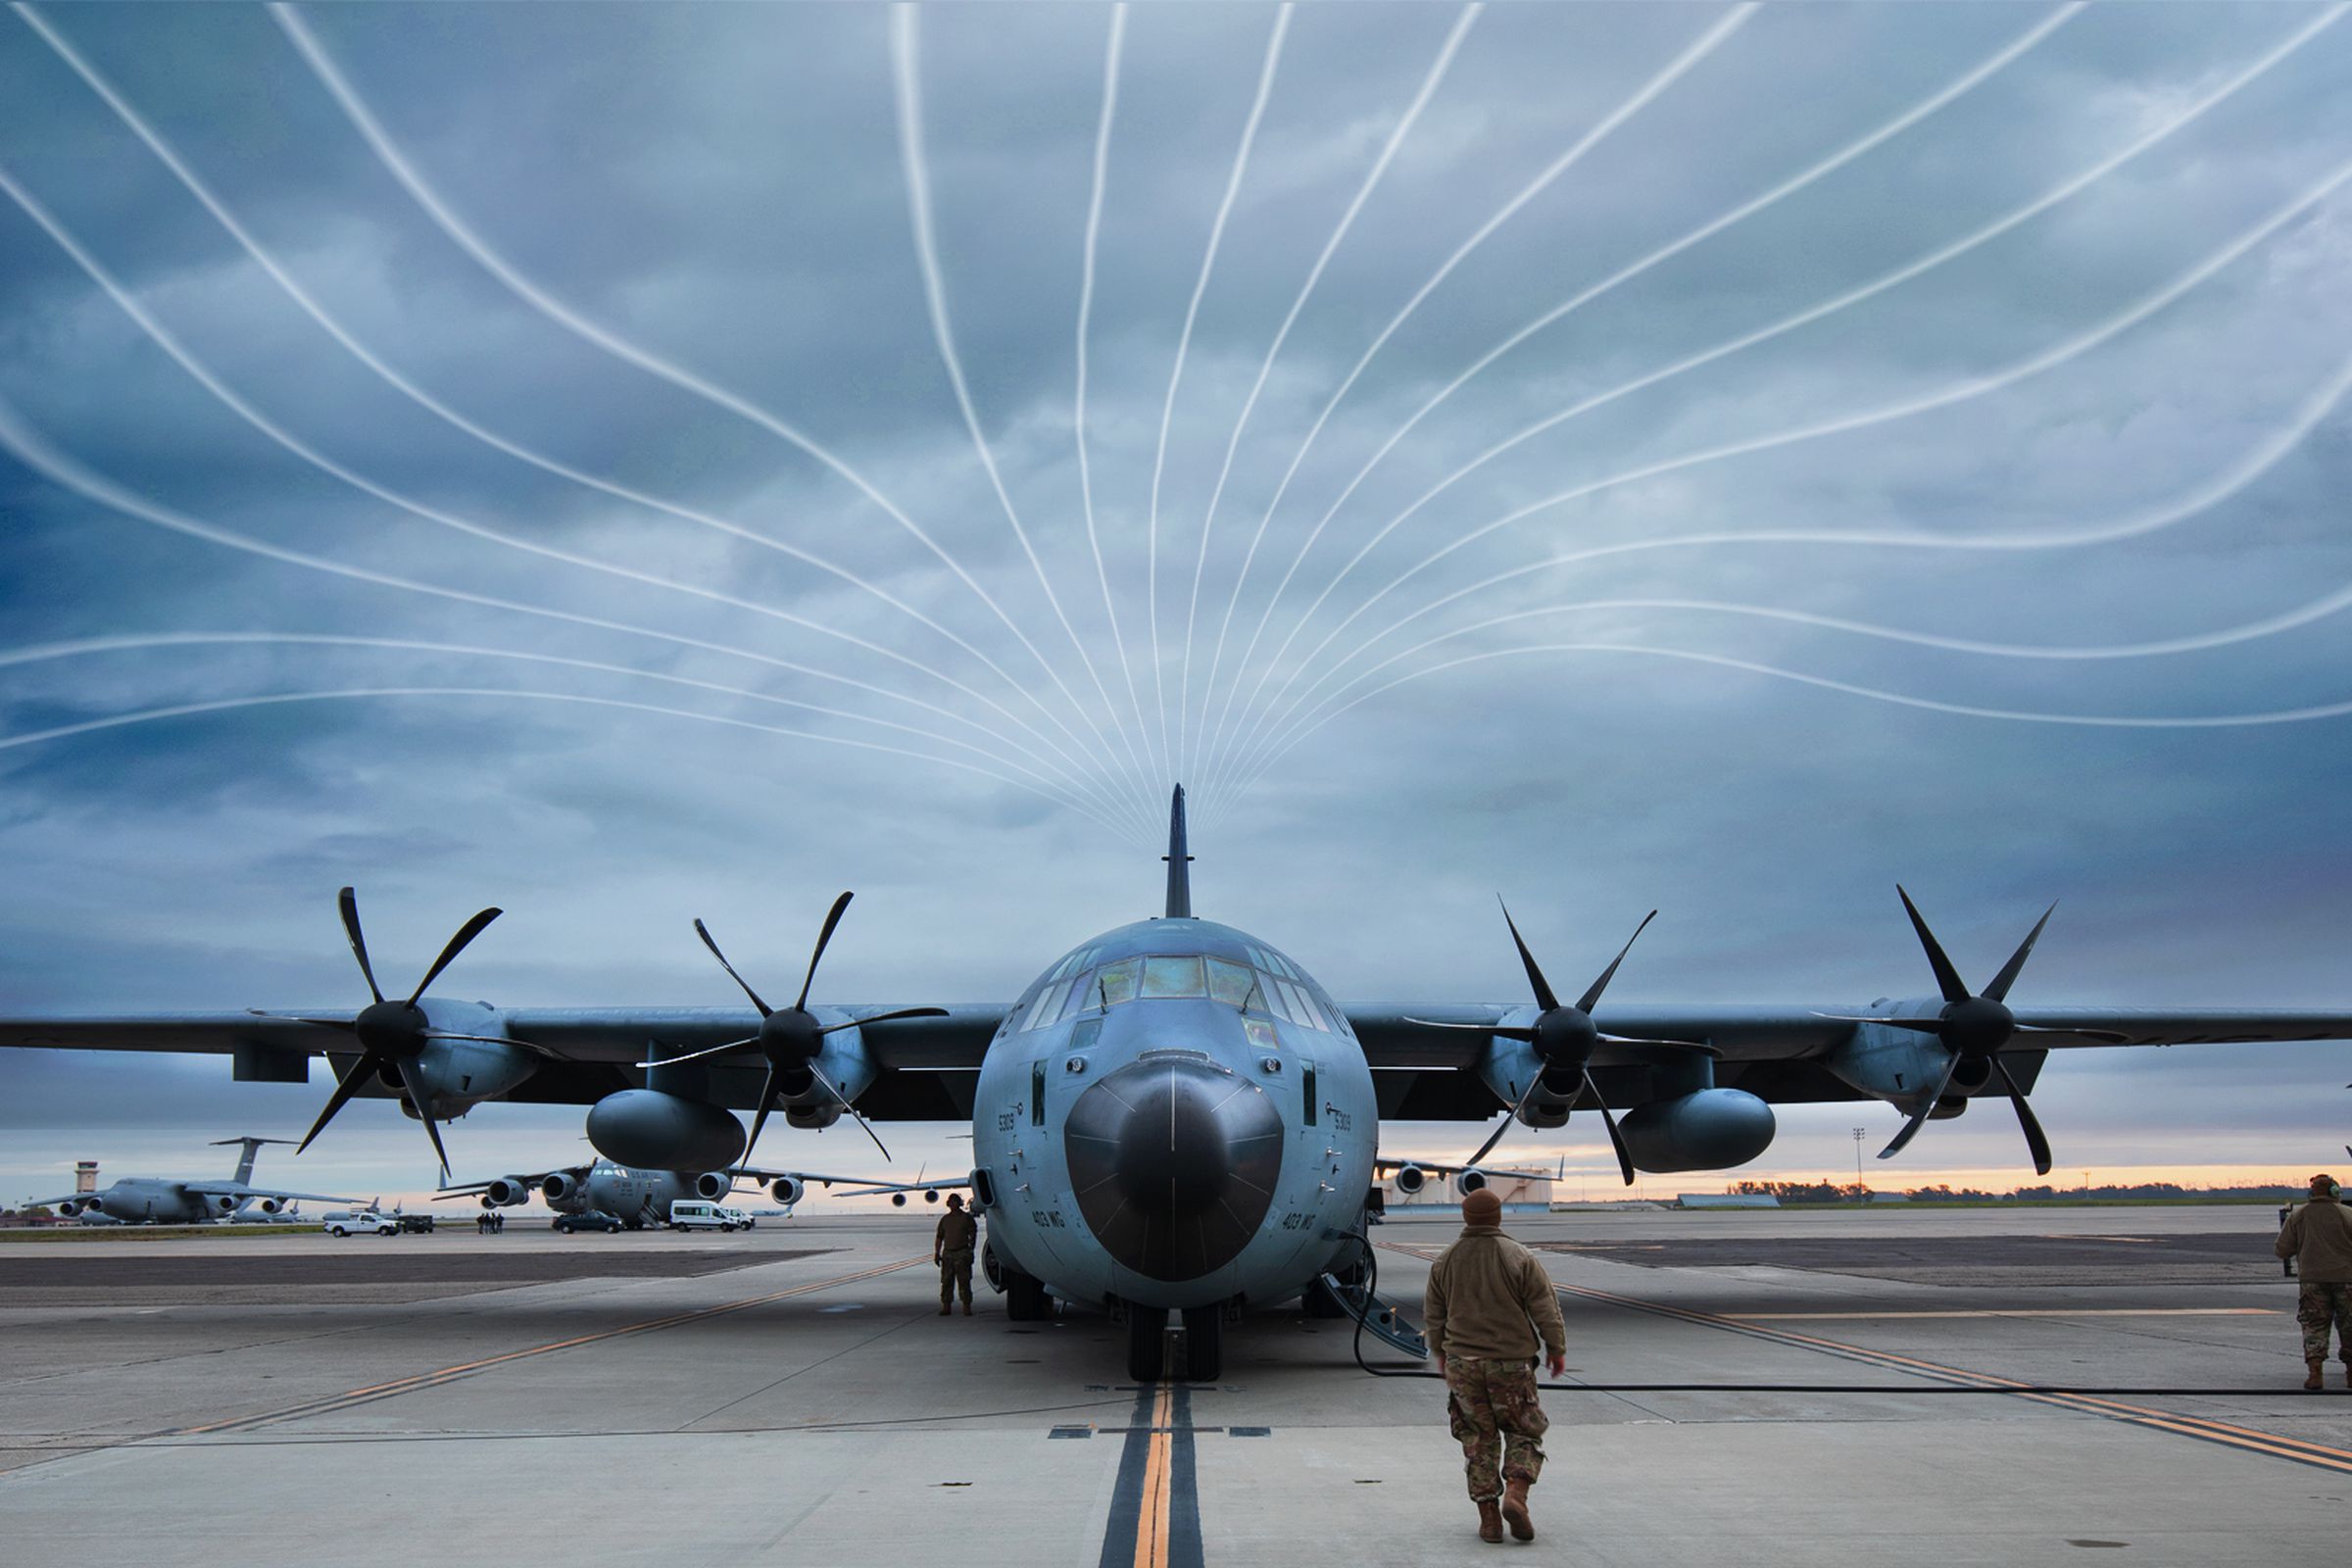 Air Force C130 plane on tarmac, with illustrated “atmospheric river” lines in the sky